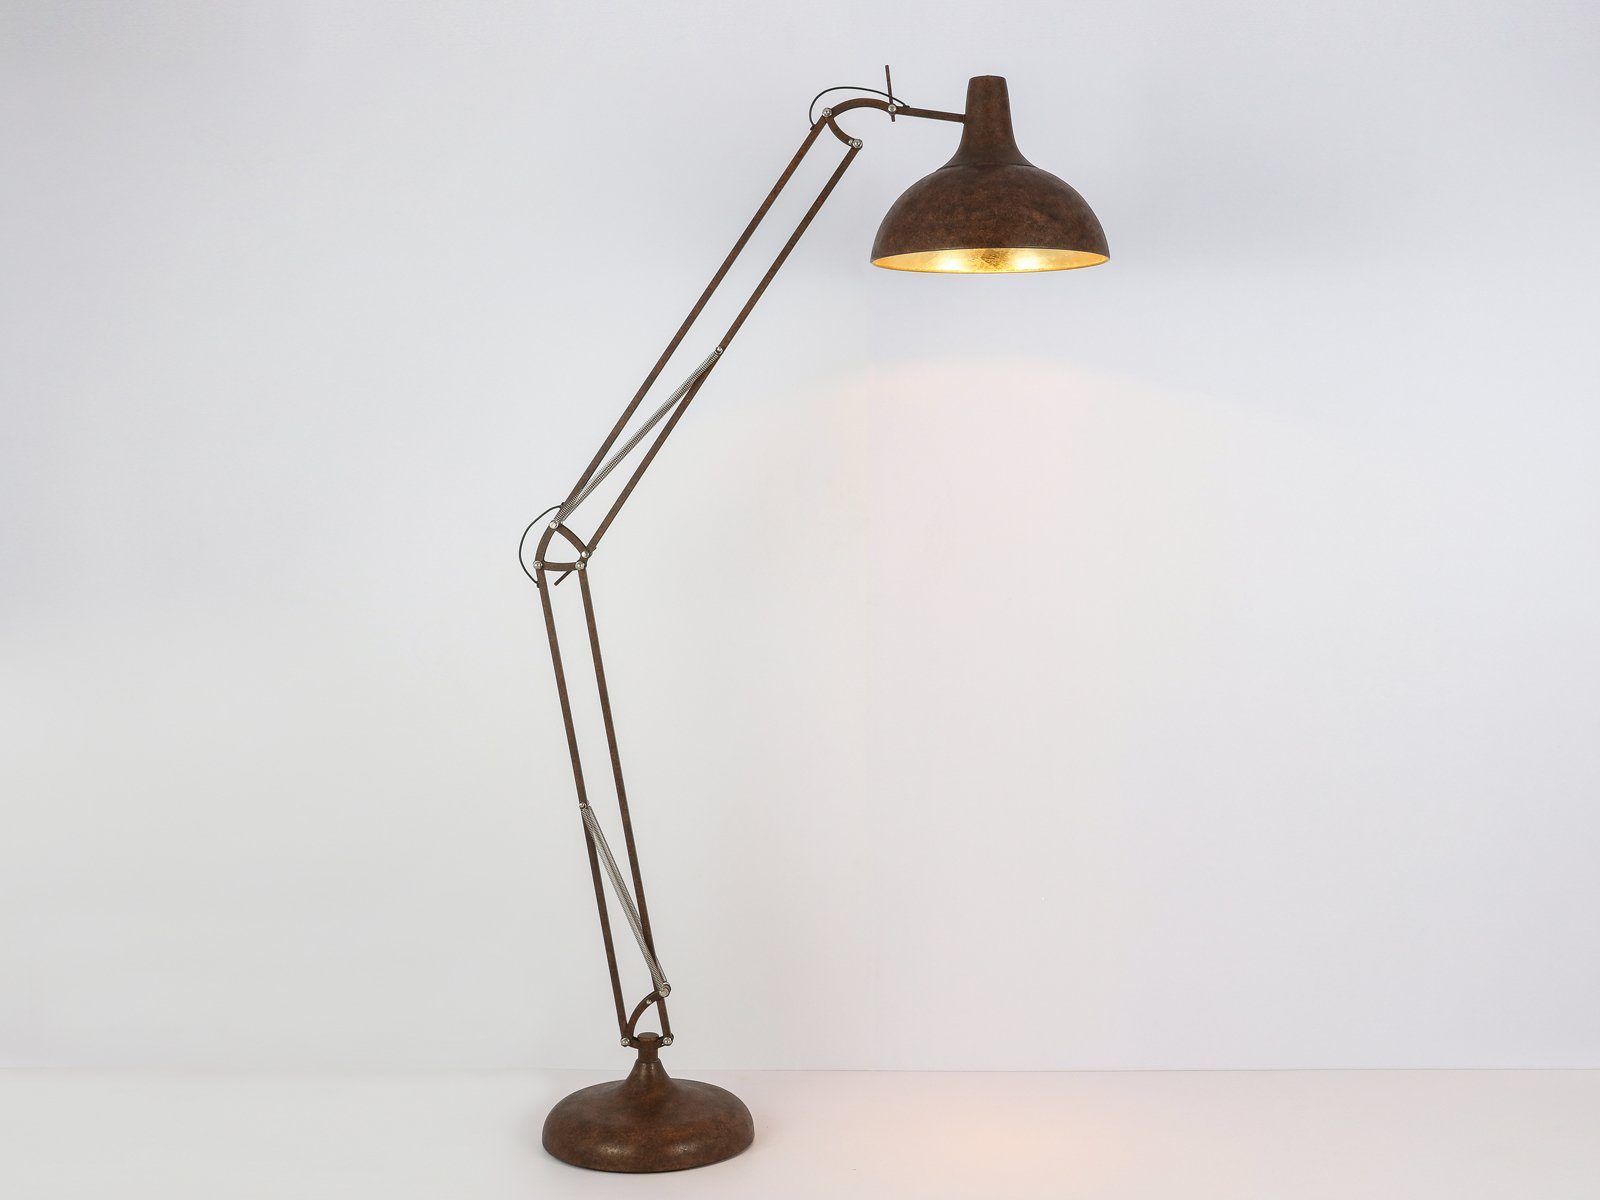 meineWunschleuchte LED Stehlampe, dimmbar wechselbar, Leselampe Leselicht warmweiß, Vintage groß-e 271cm Style Industrial Höhe LED